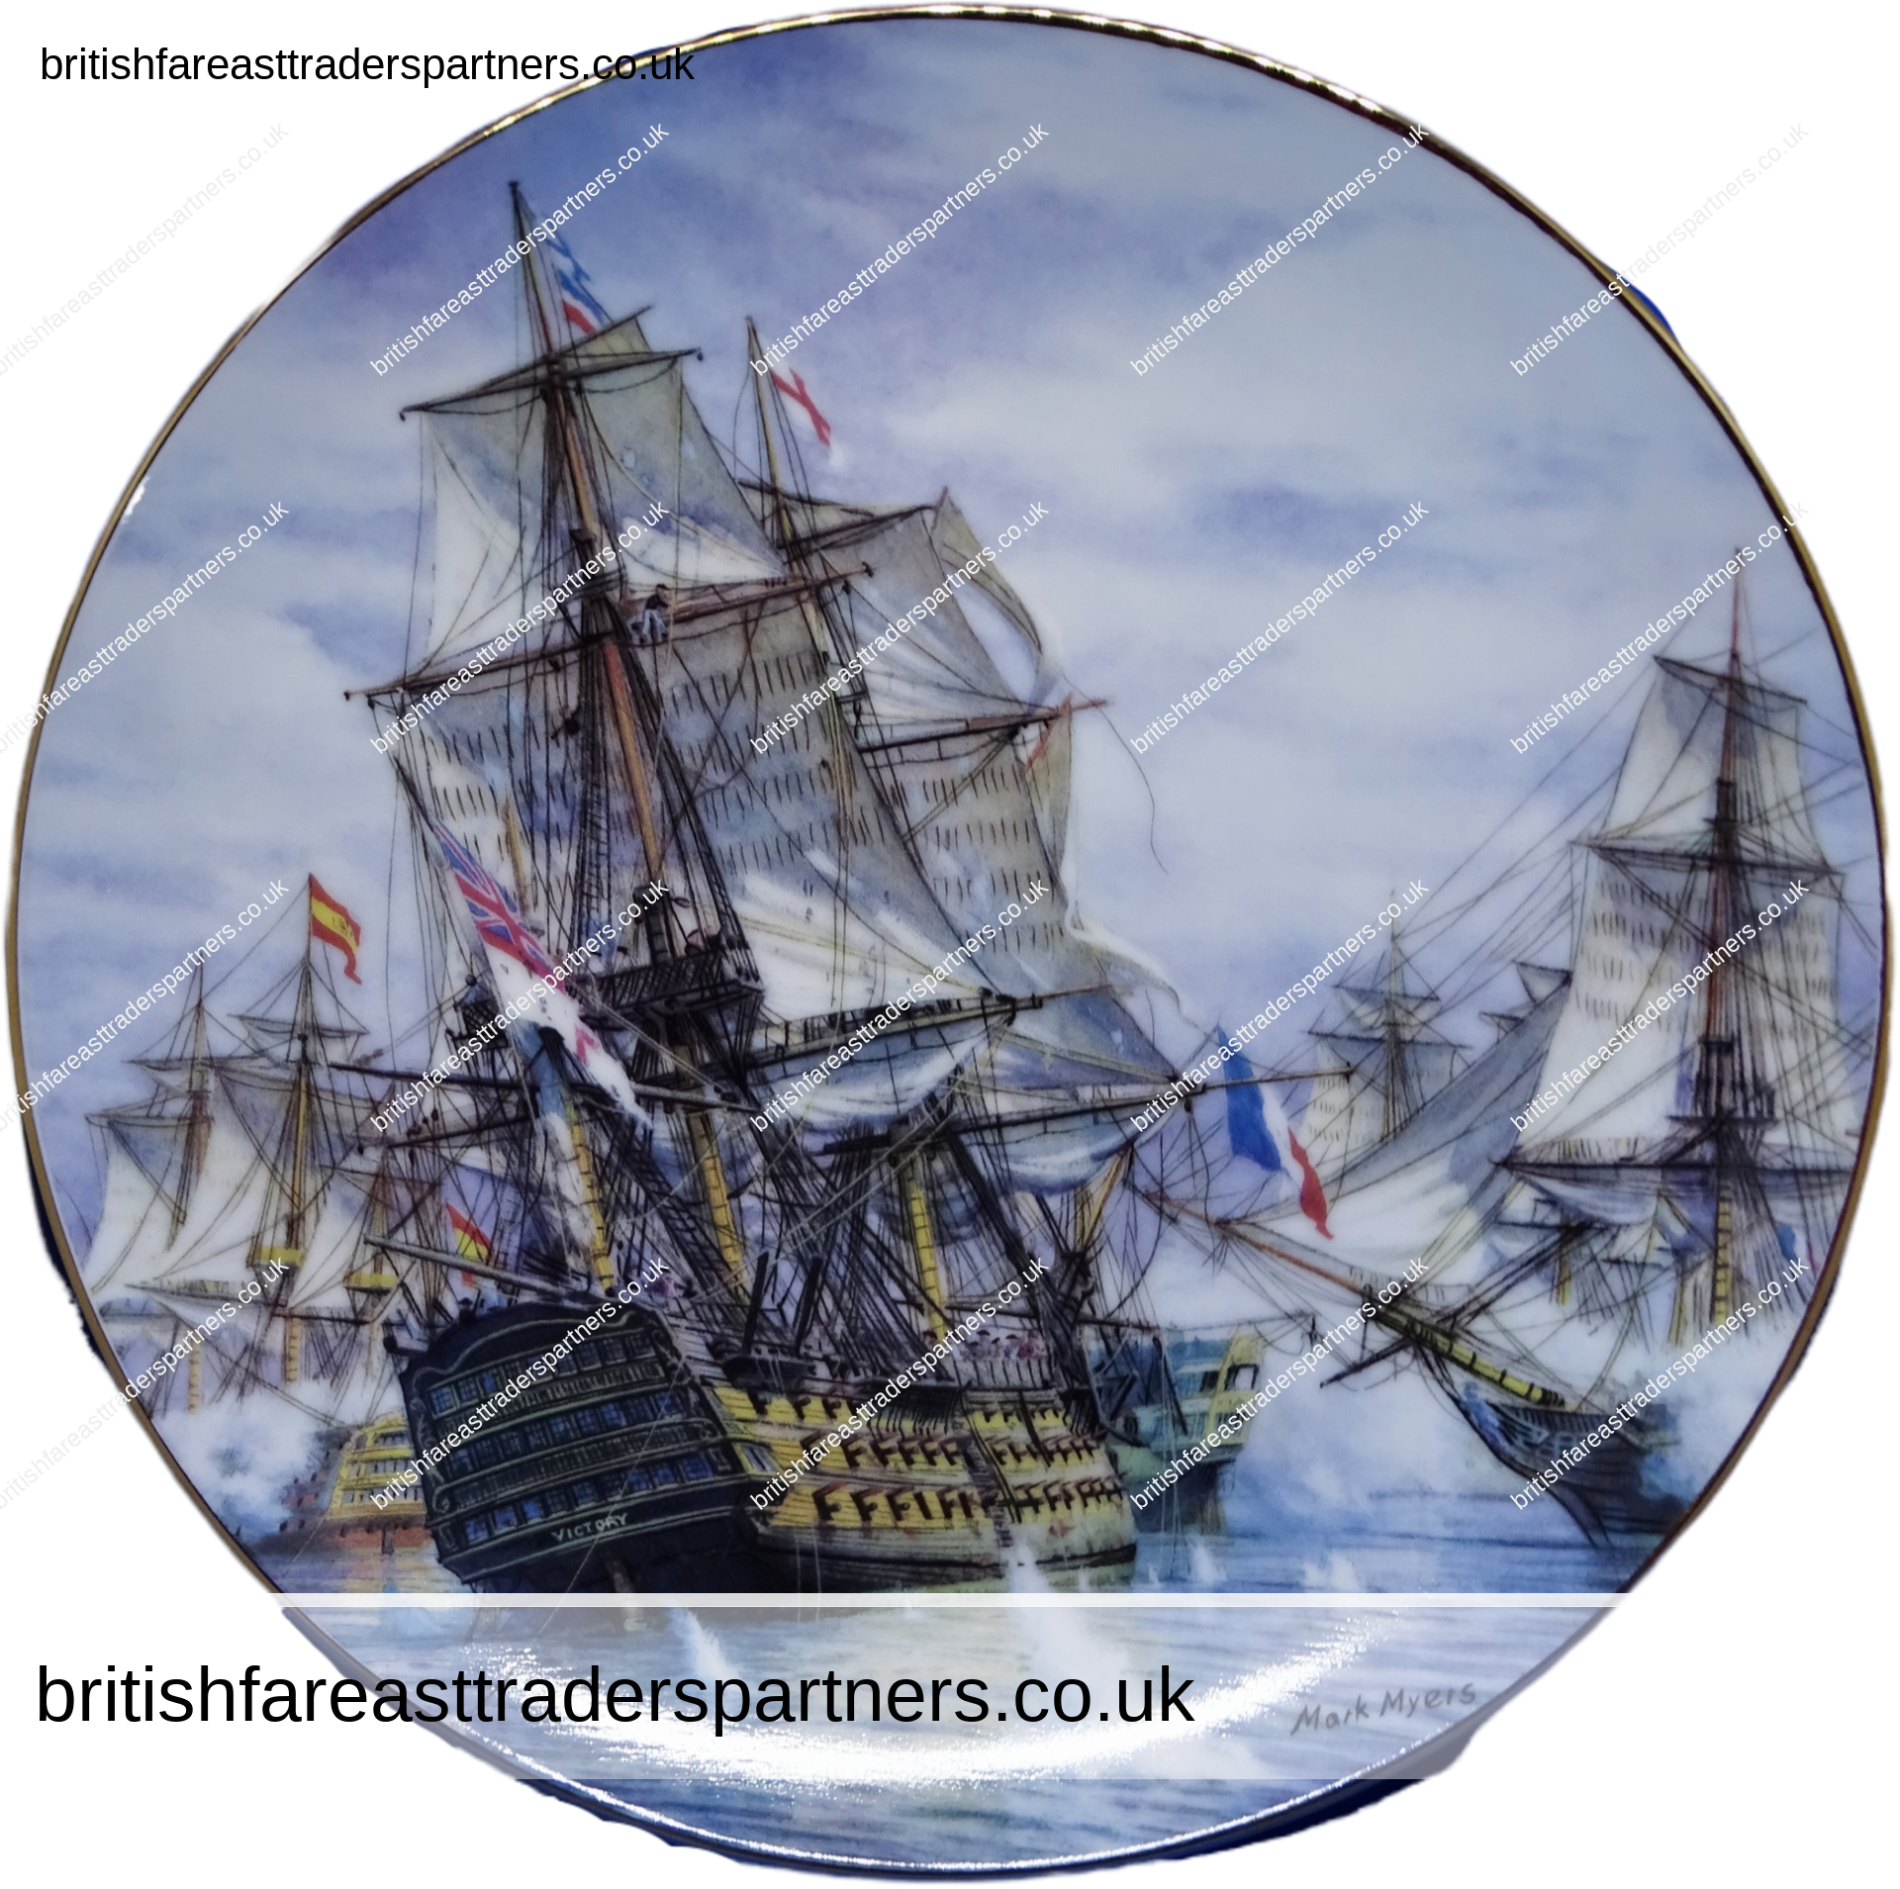 VINTAGE HAMILTON COLLECTION PLATE “GREAT BRITISH SEA BATTLES” BY MARK MYERS VINTAGE | COLLECTABLES | DECORATIVE PLATES | ENGLISH / ENGLAND  | FINE PORCELAIN | TRANSPORT | SAILING | SHIPS | NAVAL / NAUTICAL / MARITIME |  LIFESTYLE | HERITAGE | HISTORY | CULTURE